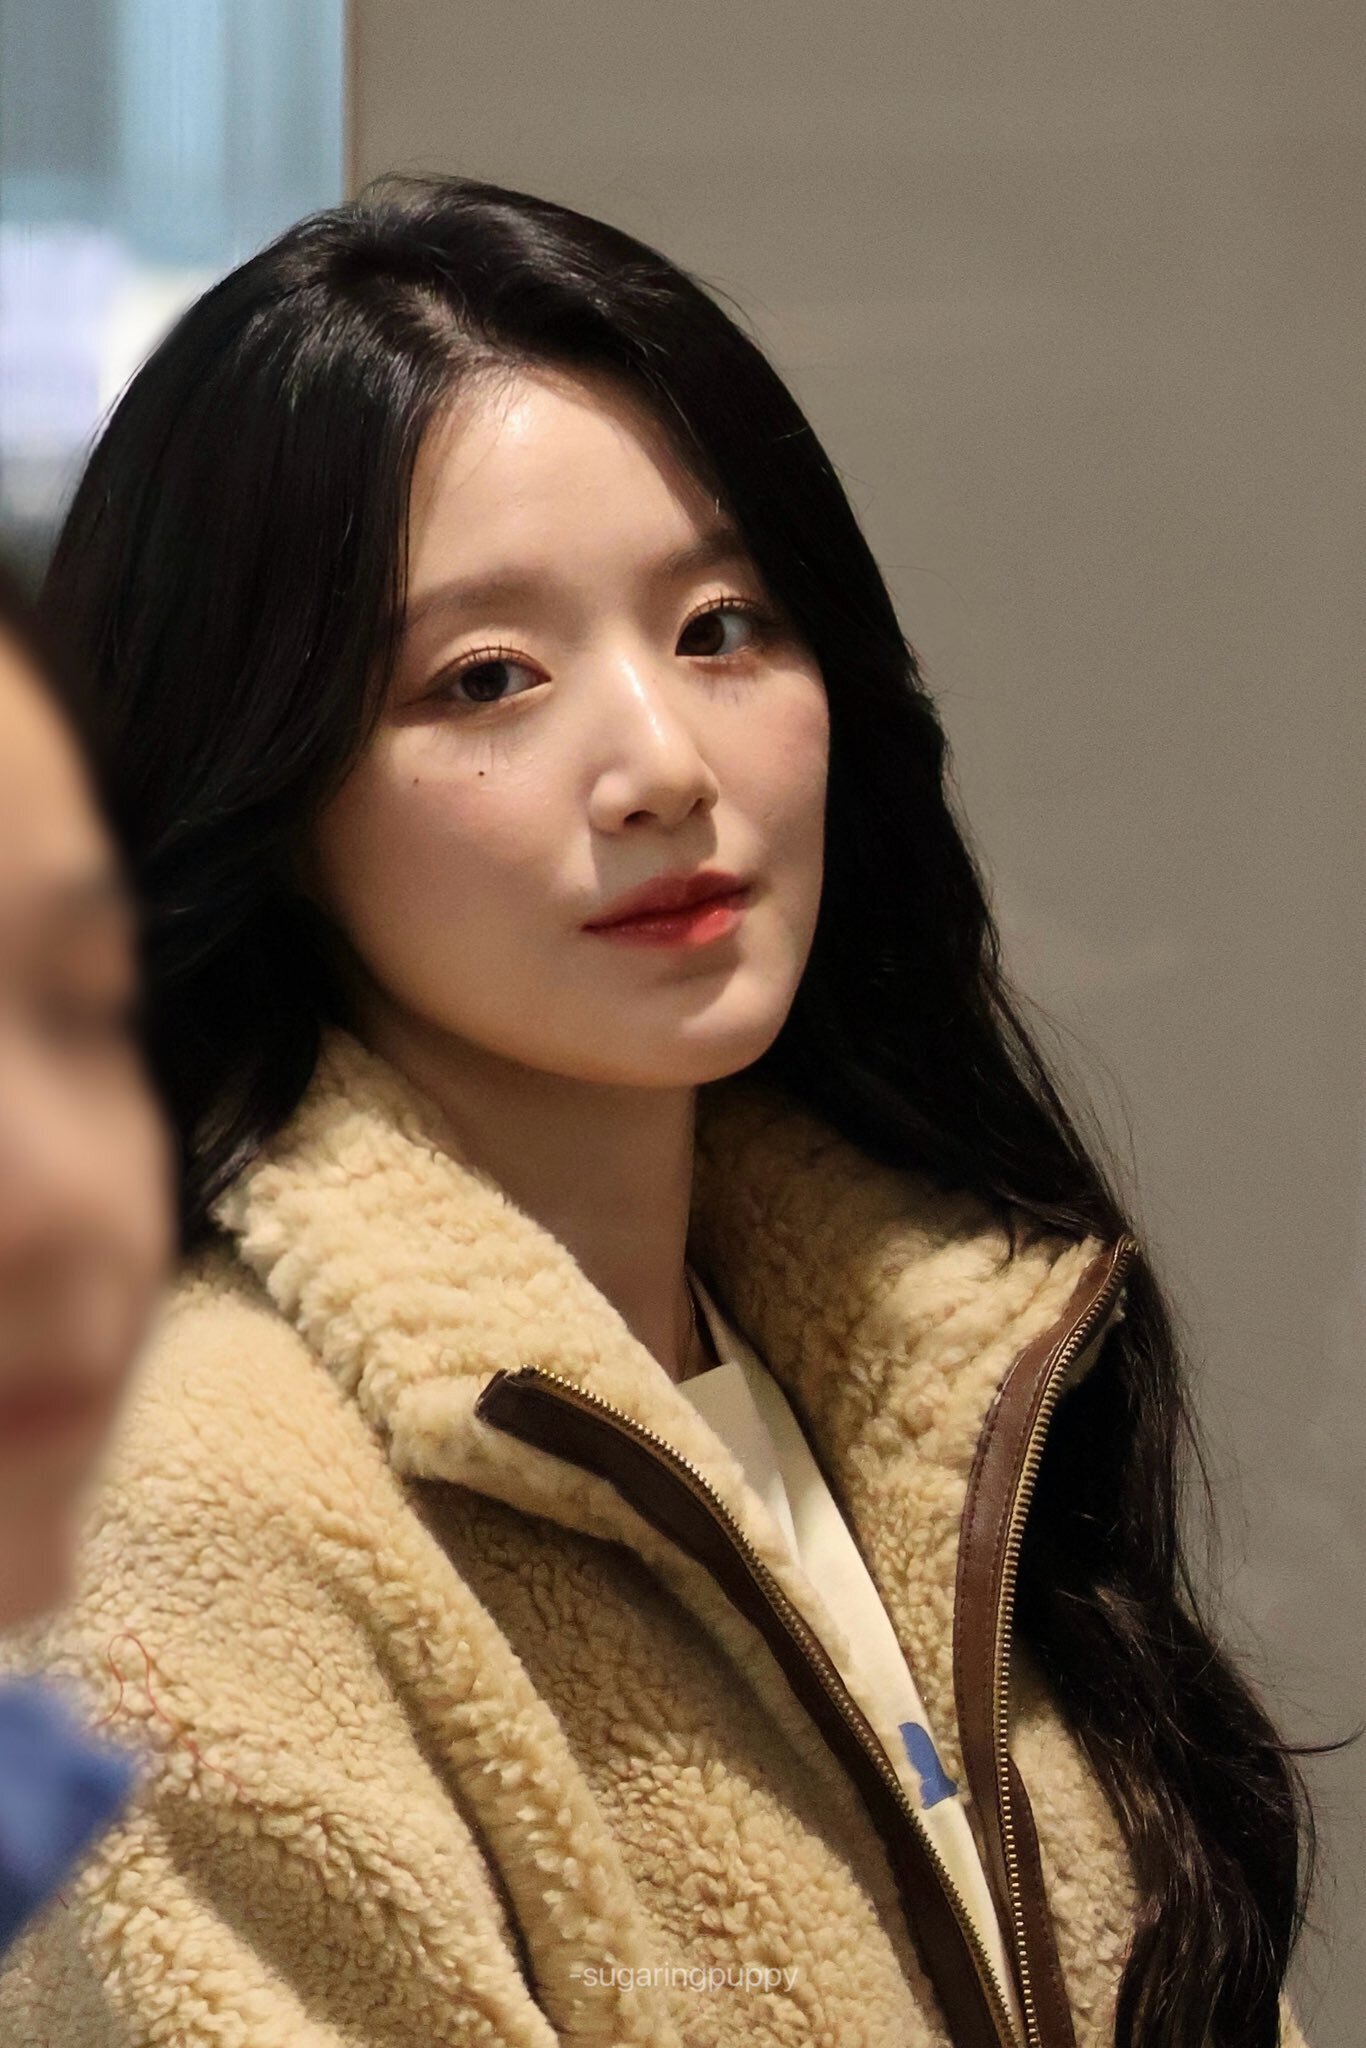 231028 (G)I-DLE Shuhua at Incheon International Airport | kpopping